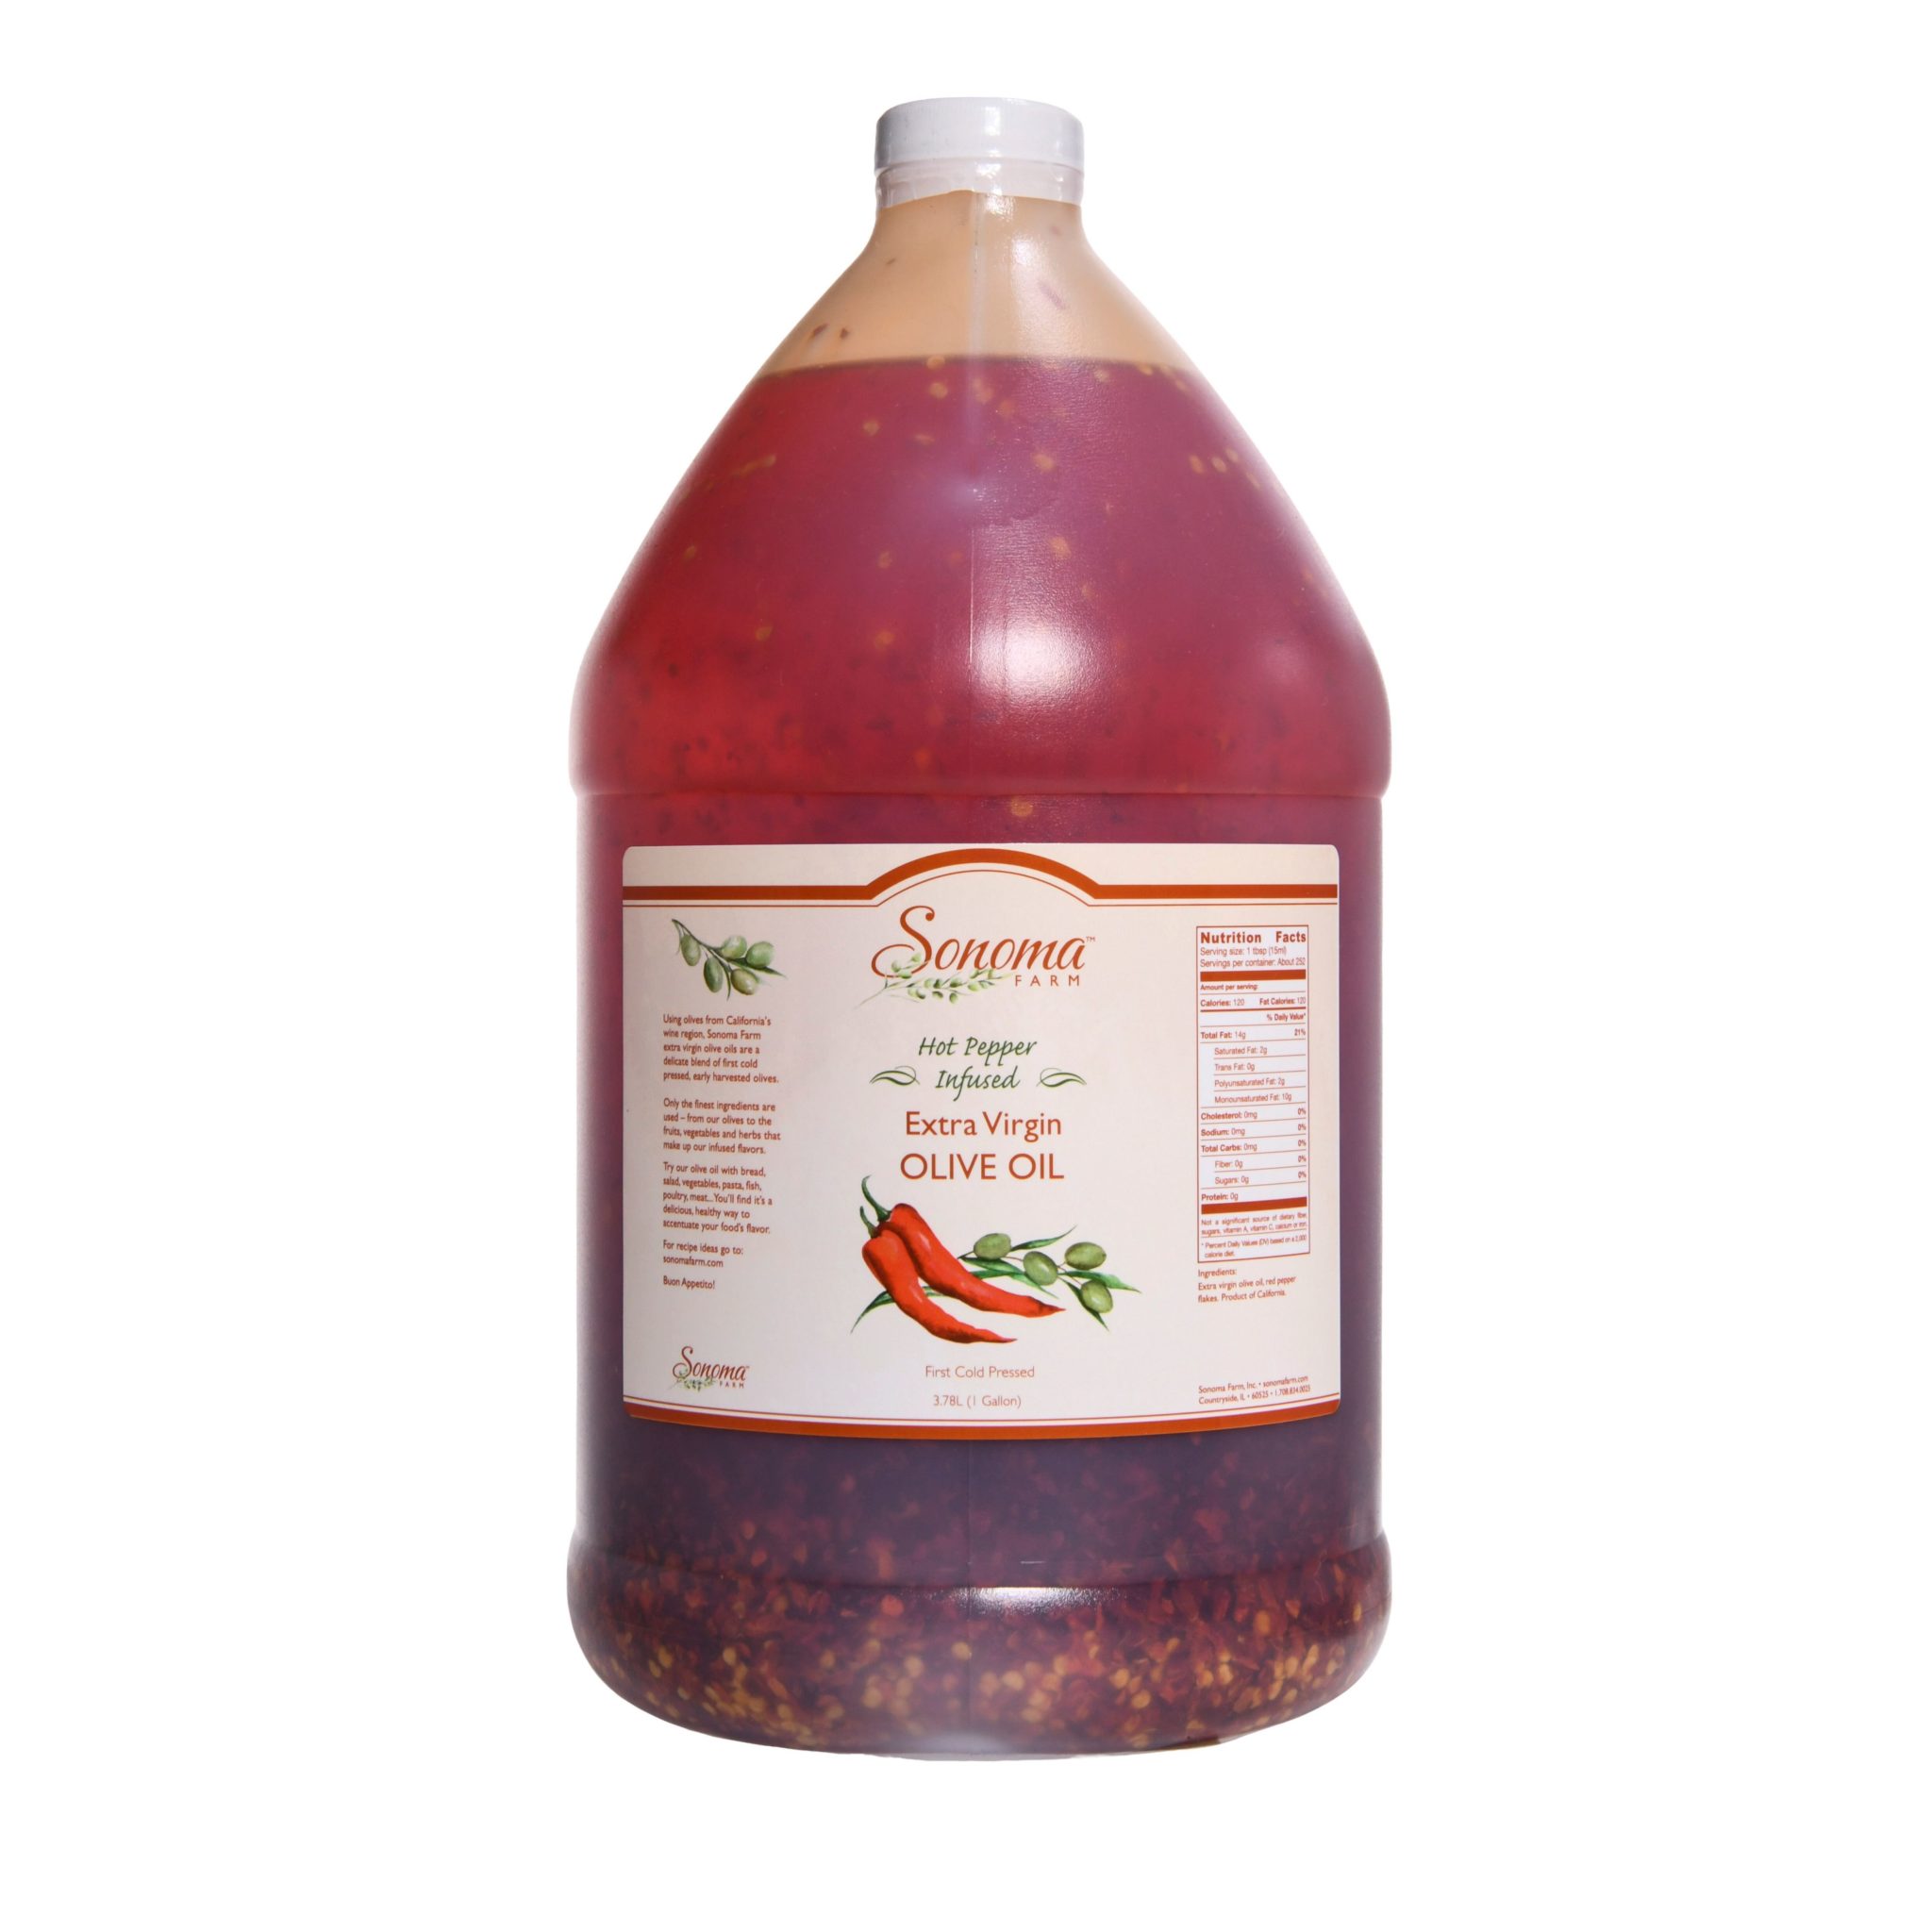 https://www.sonomafarm.com/product/hot-pepper-infused-extra-virgin-olive-oil-with-red-pepper-flakes-bulk-1-gallon-3-8-liter-128oz-food-service/